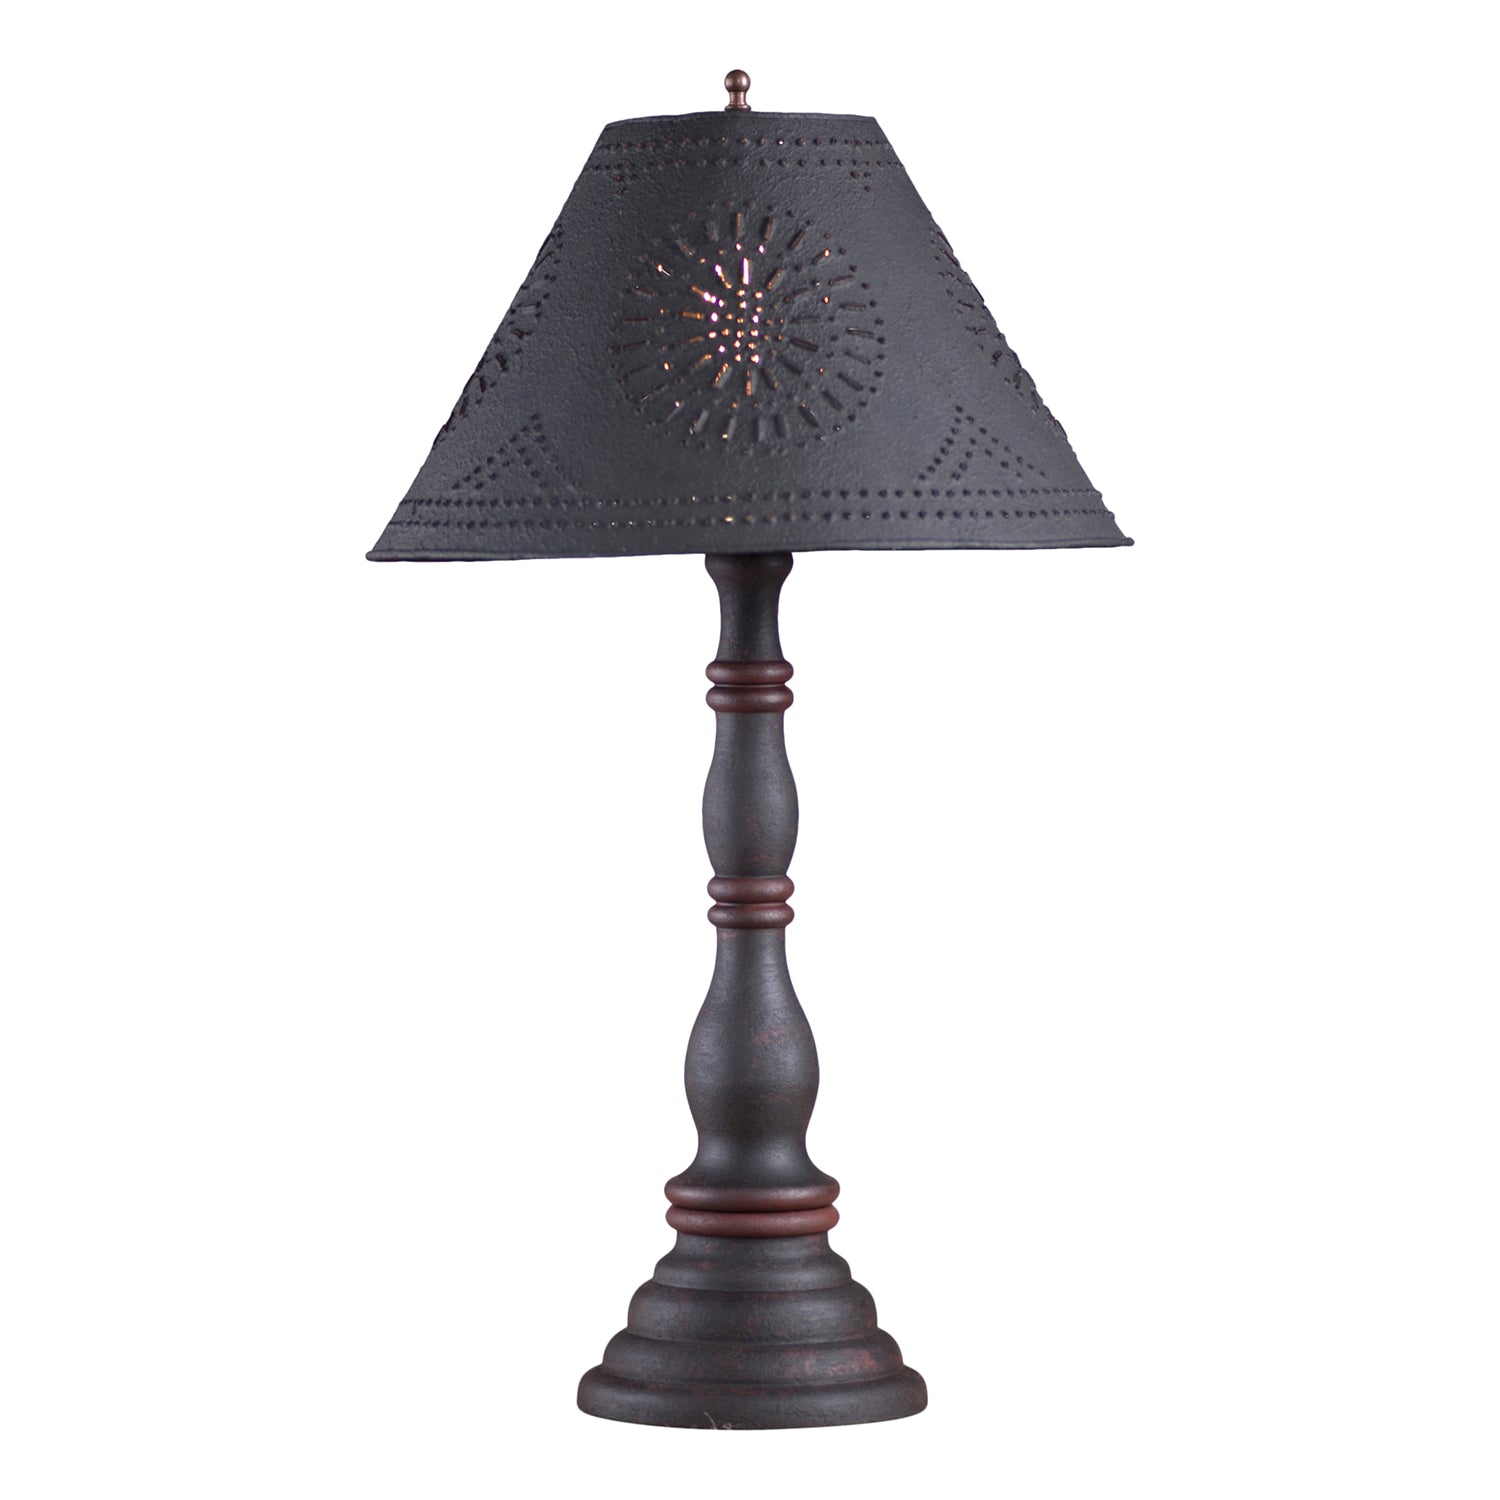 Davenport Lamp in Hartford Black with Red with Textured Black Tin Shade